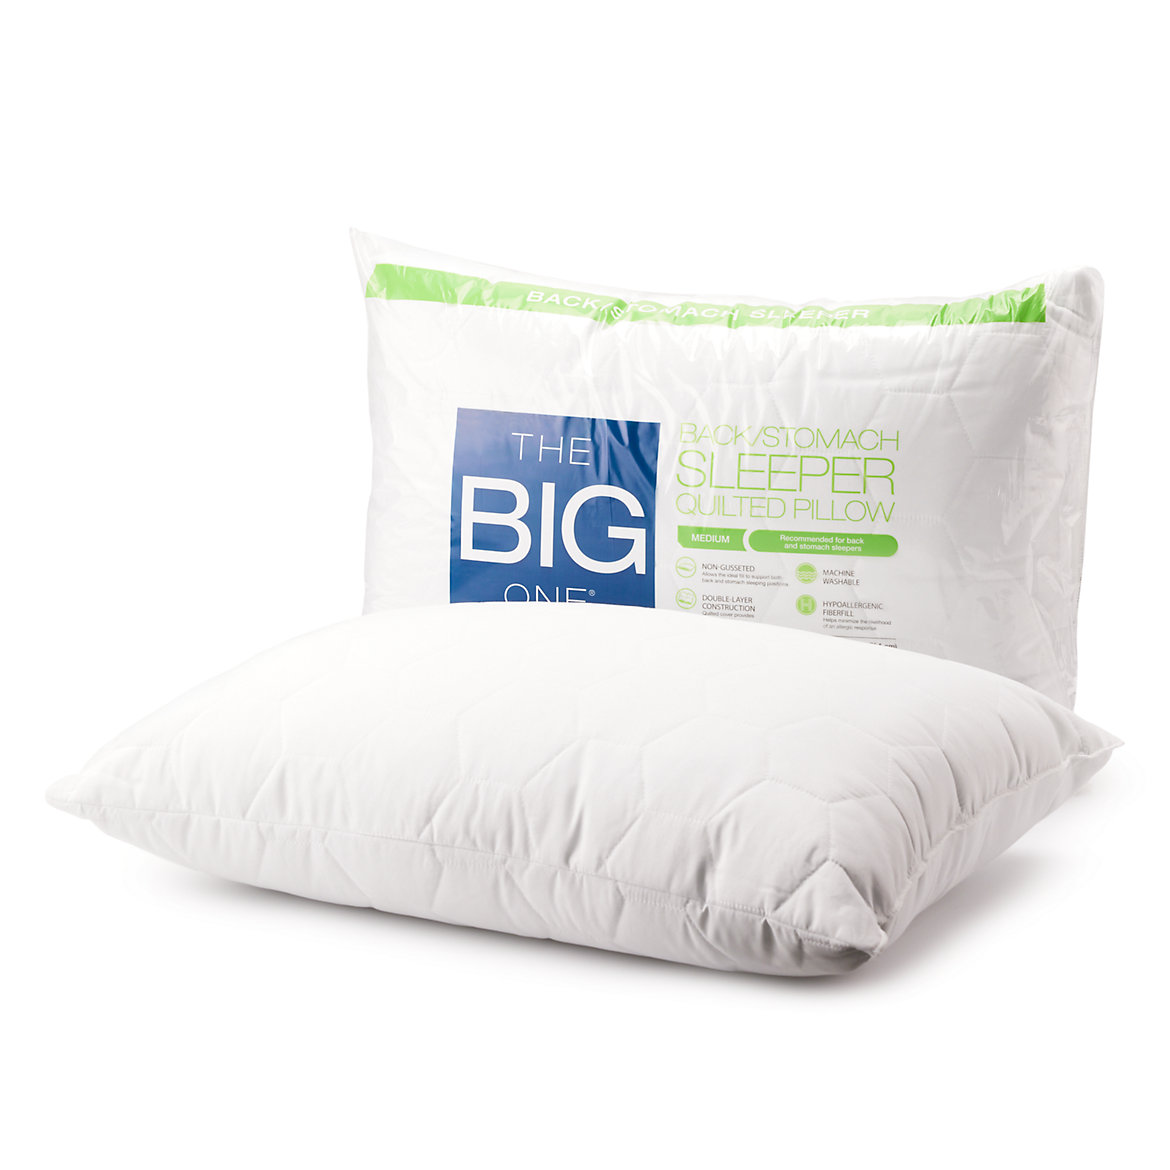 The Big One® Quilted Back & Stomach Sleeper Bed Pillow | Kohls